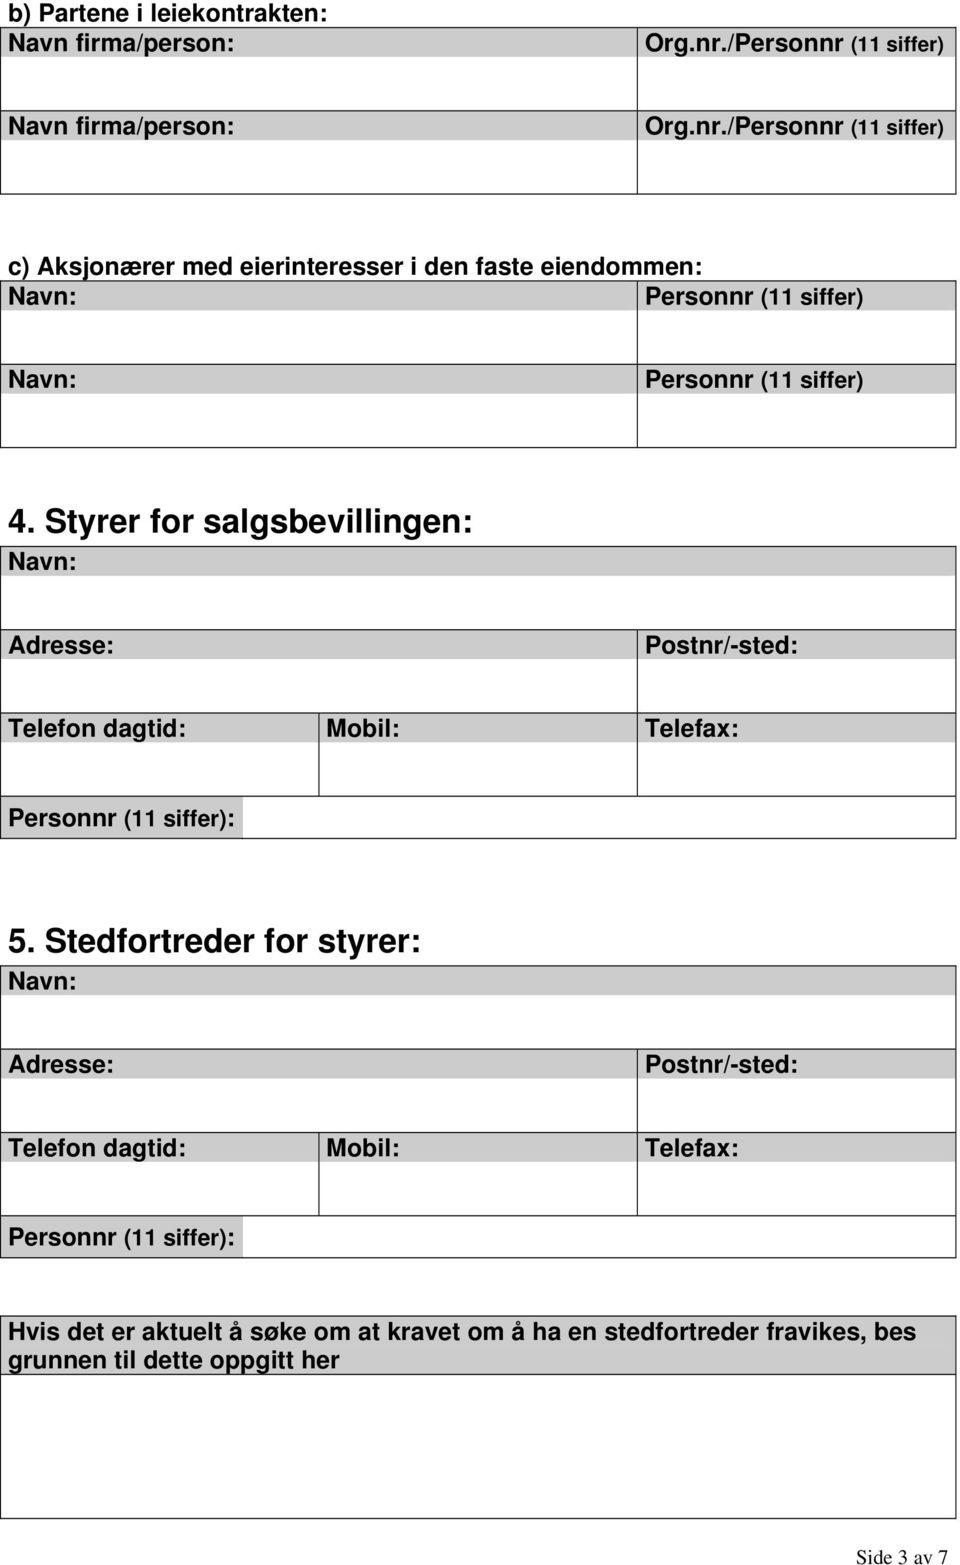 (11 siffer) Navn firma/person: Org.nr.